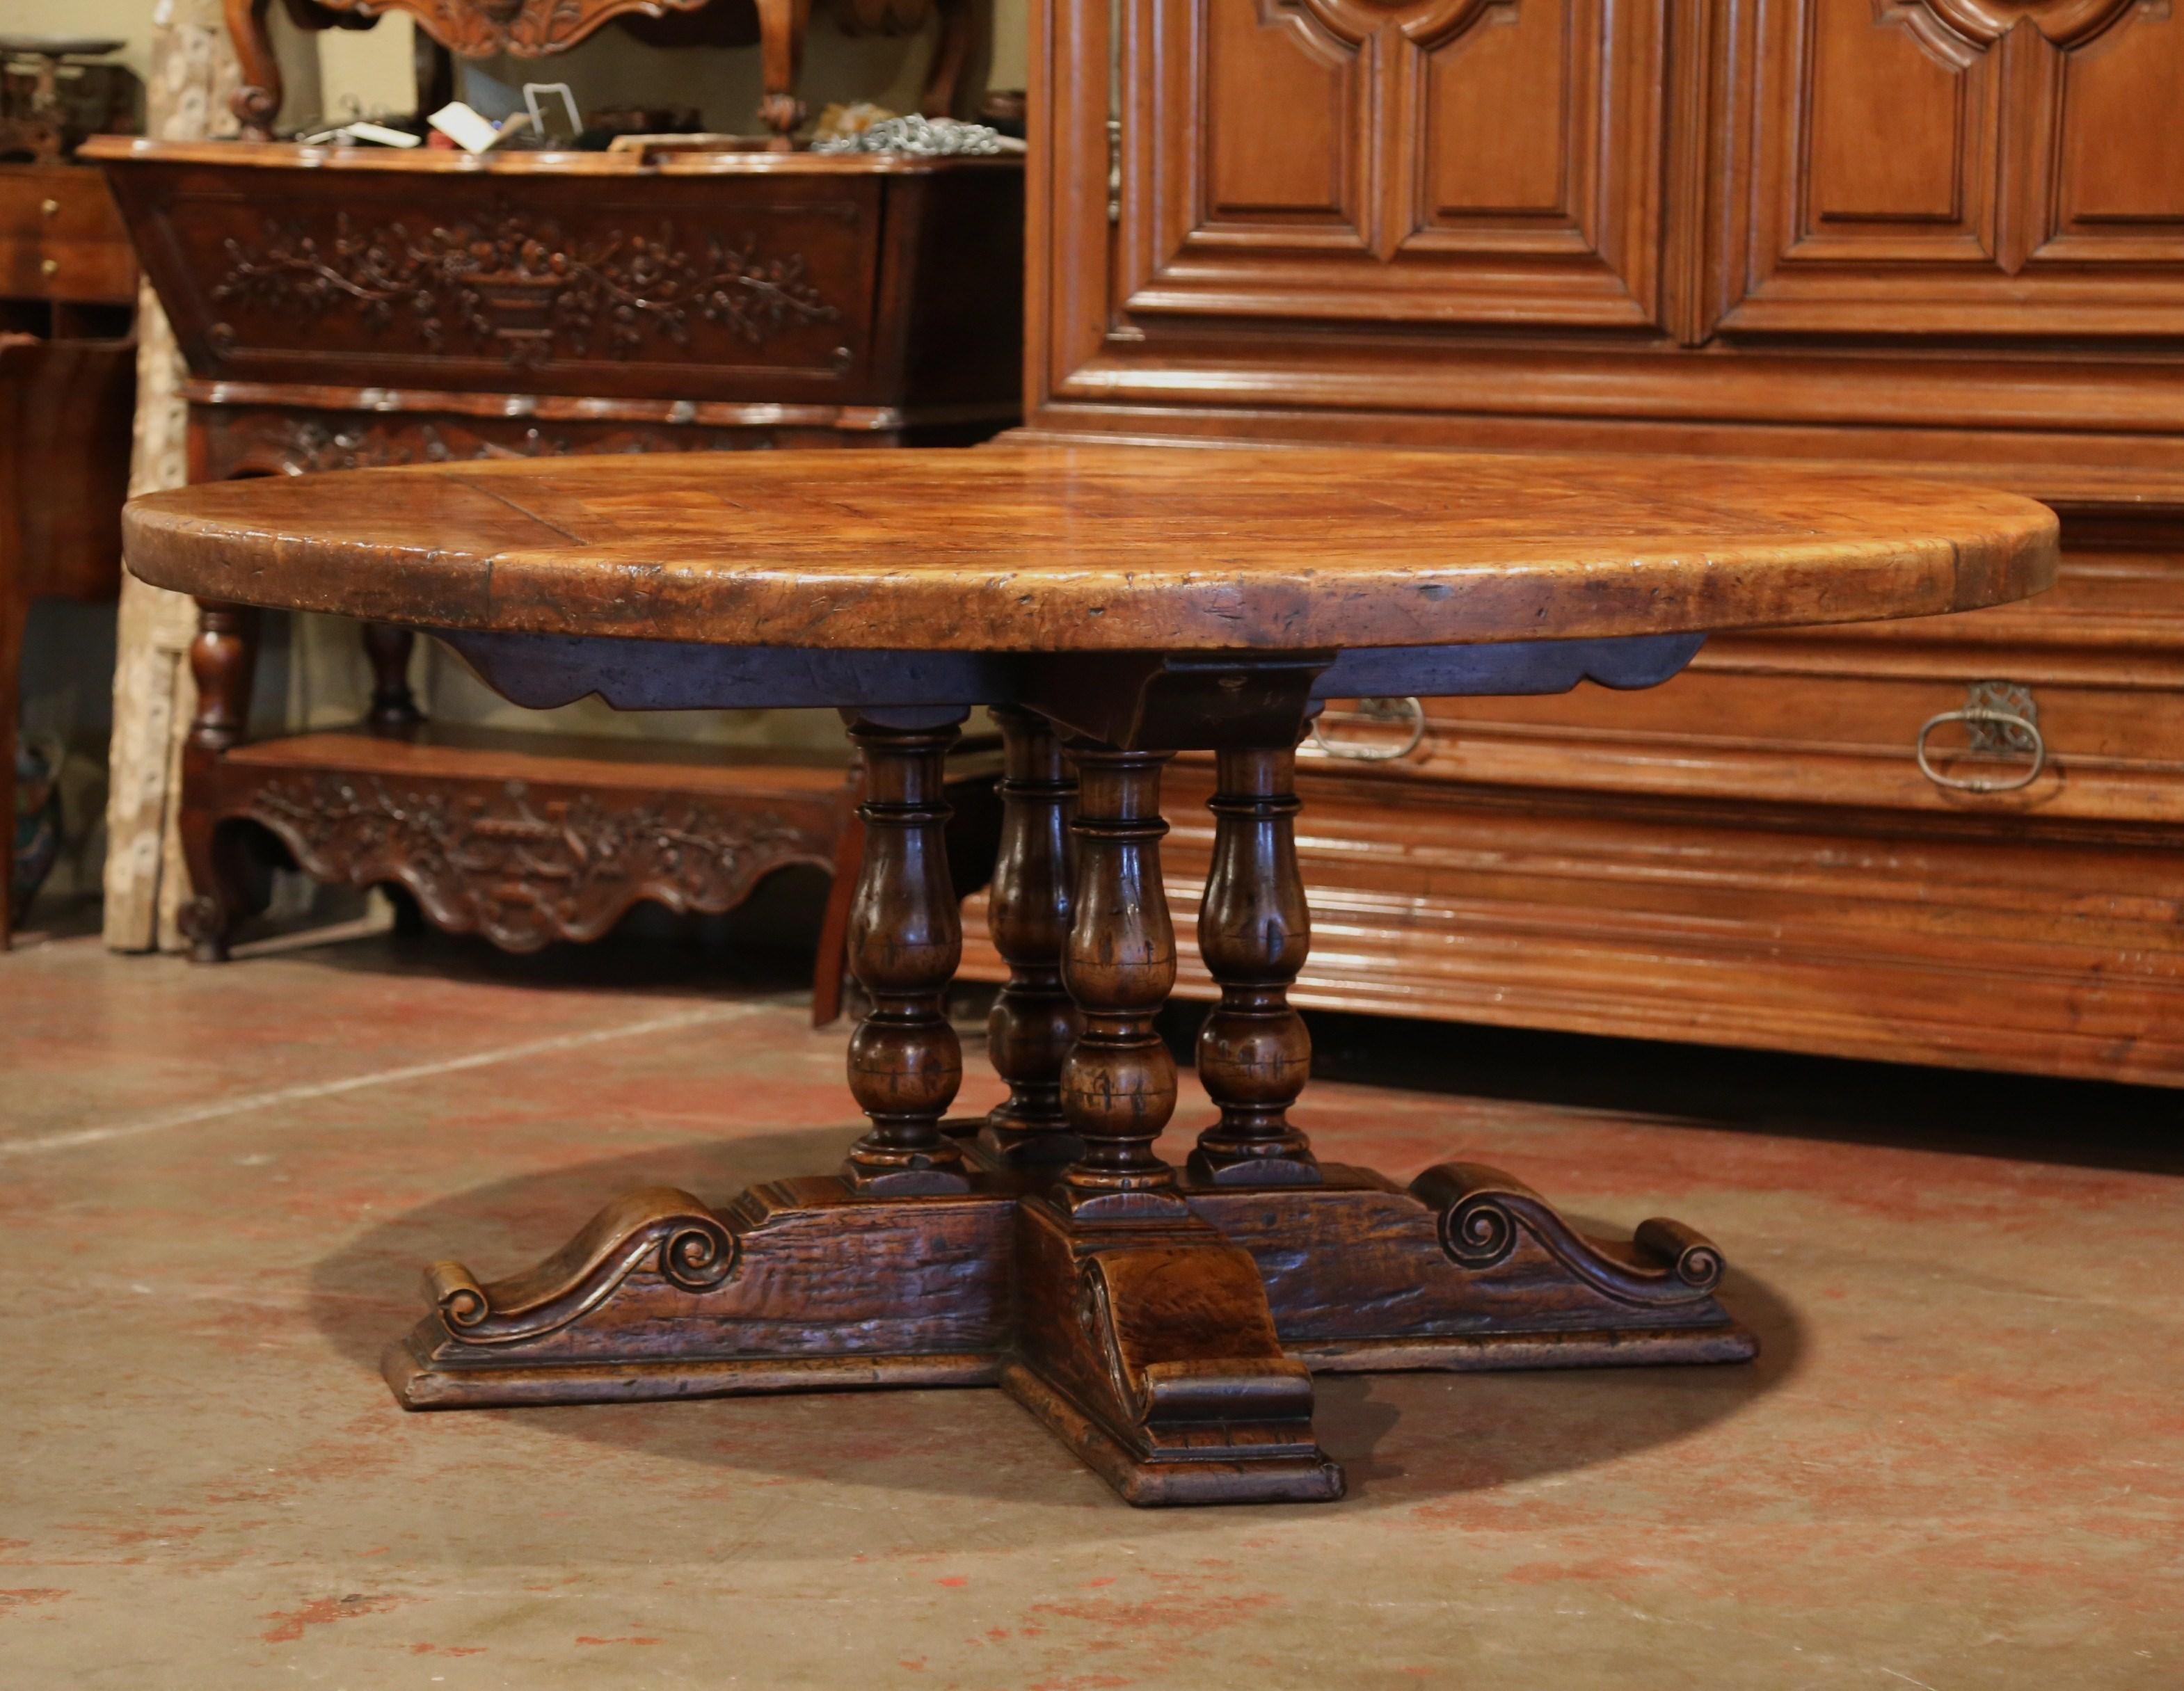 This large fruitwood table for six to ten people, would make an impressive addition to any dining room or breakfast room. Crafted in the Pyrenees mountains of France half a century ago, the thick round surface features a parquet and geometric decor